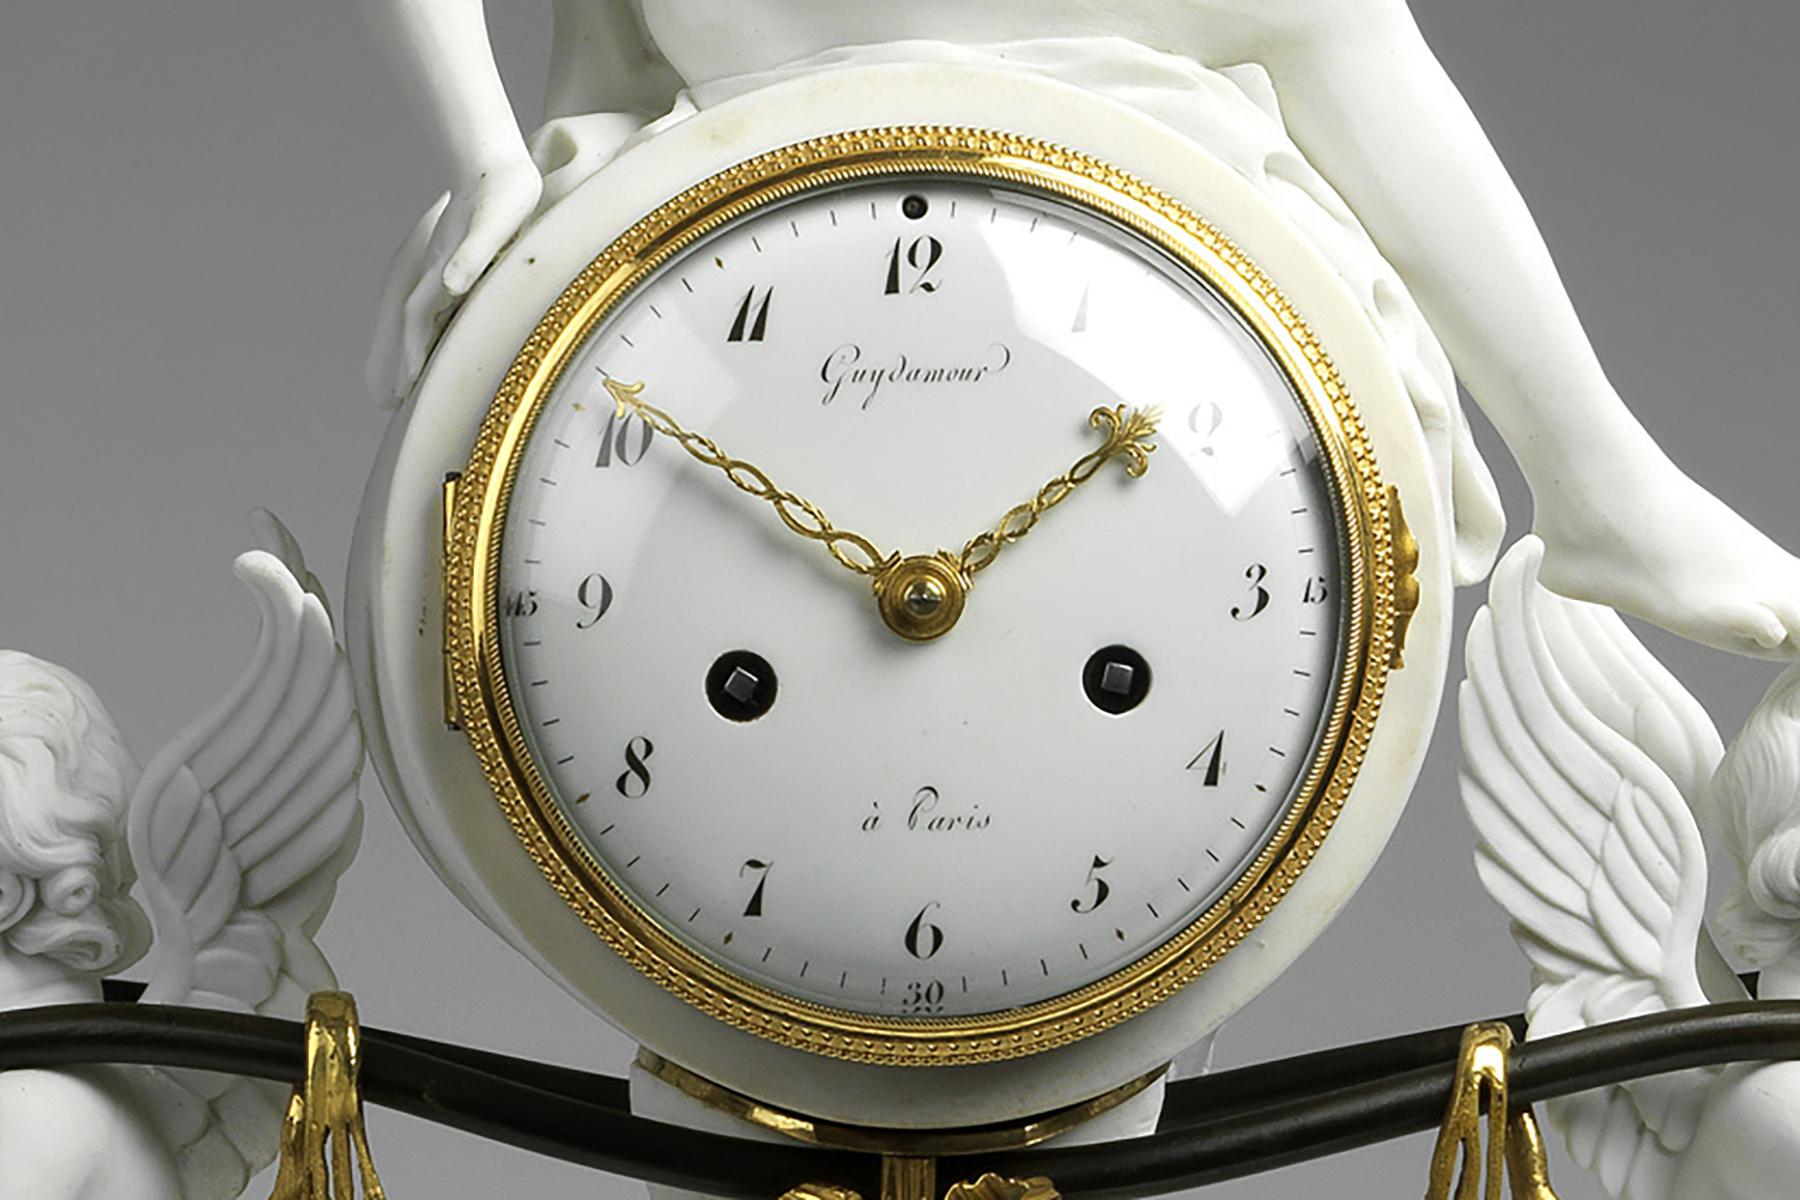 The circular white enamel dial with black numerals, inscribed Guydamour à Paris, with striking movement contained within a round case; surmounted by a woman, her right hand raised clasping a goblet, her body being partially draped in fabric; the